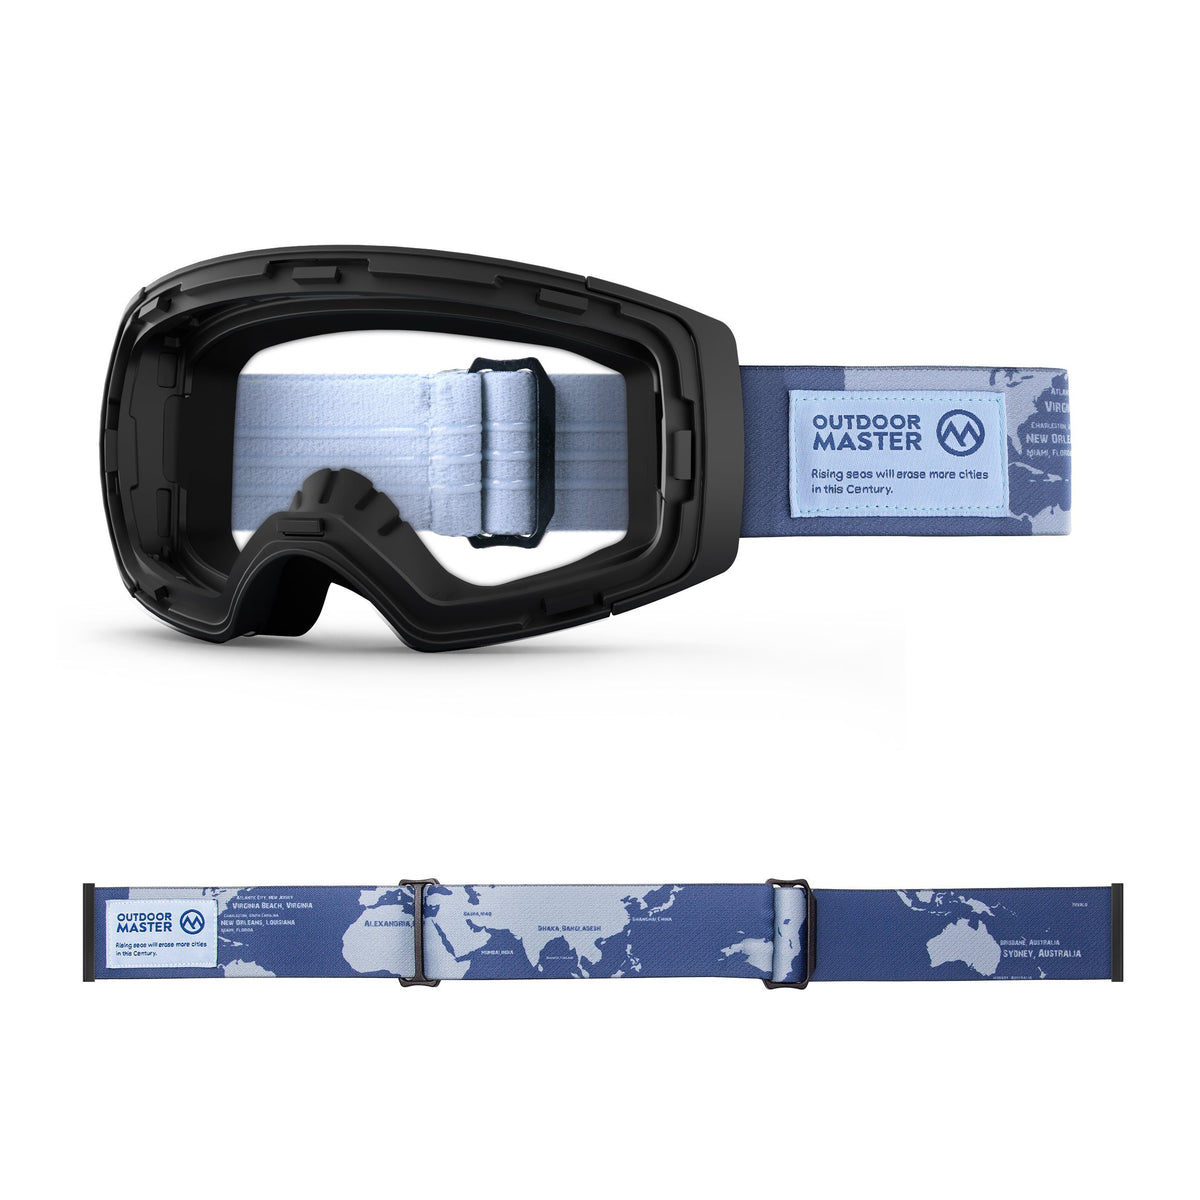 Outdoormaster ECO Friendly Goggles Frame & Strap - Limited Edition Not Including Lens OutdoorMaster THE DISAPPEARING PLACES